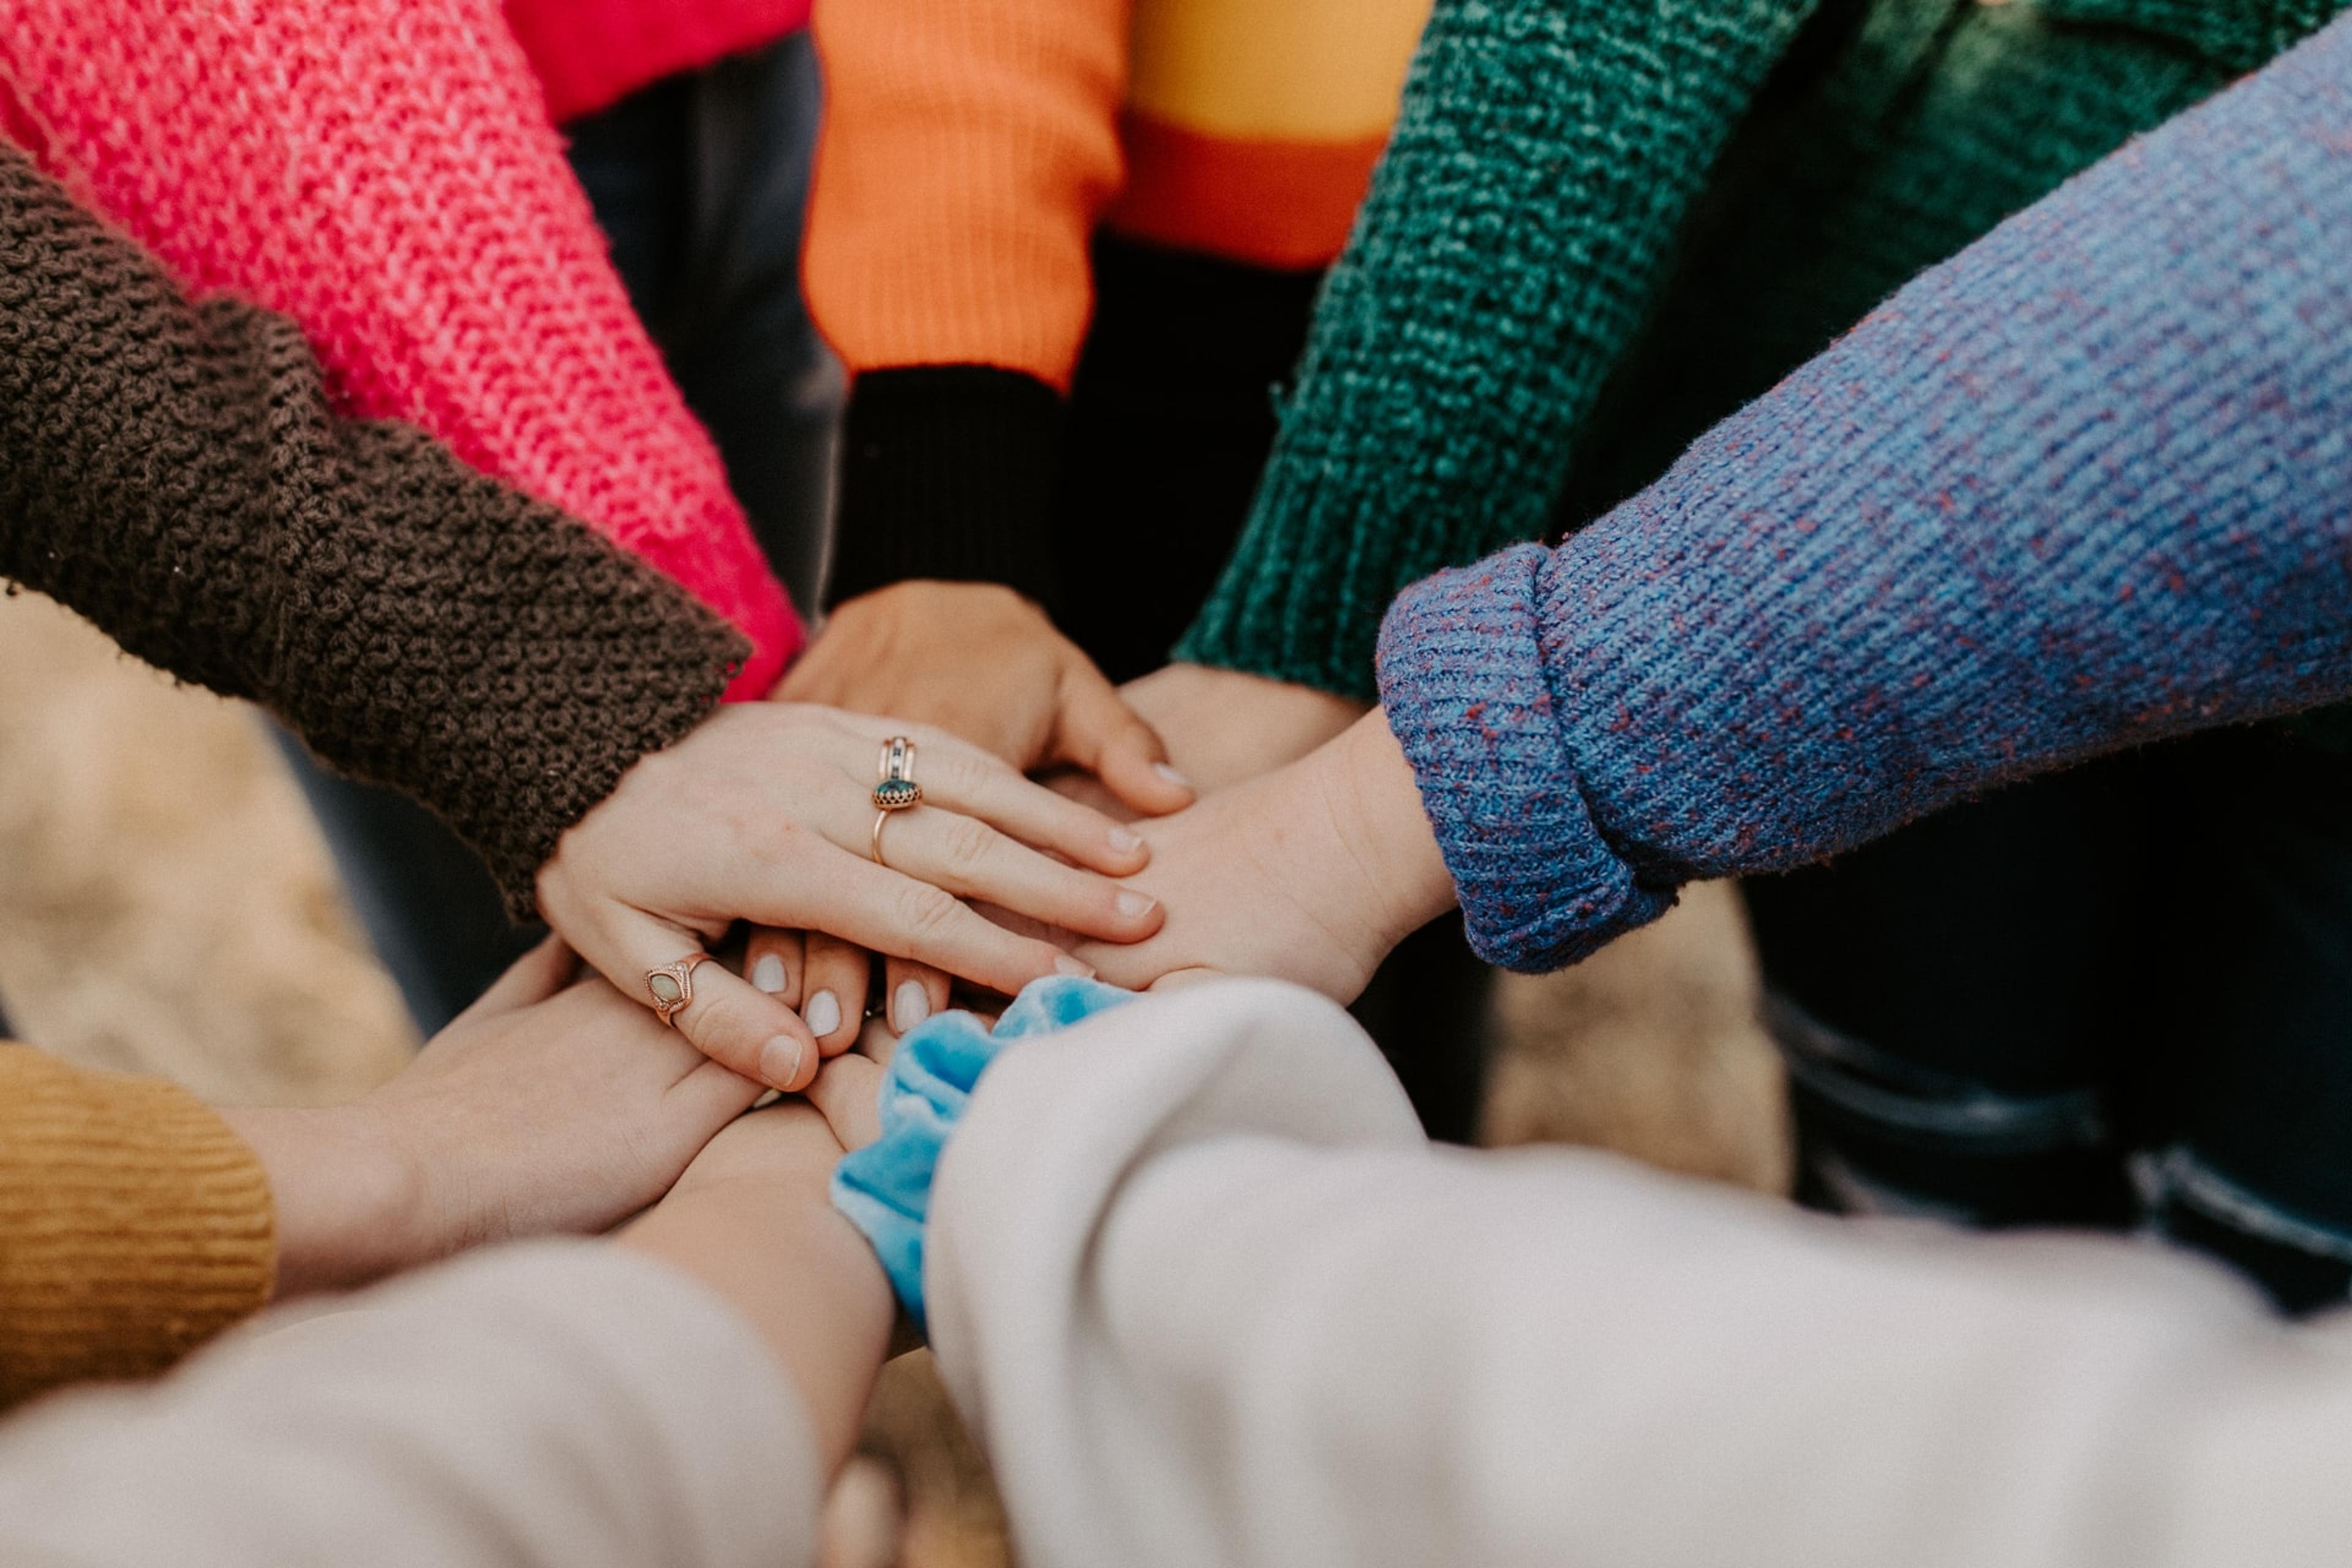 Young people in colorful sweaters put their hands in a circle